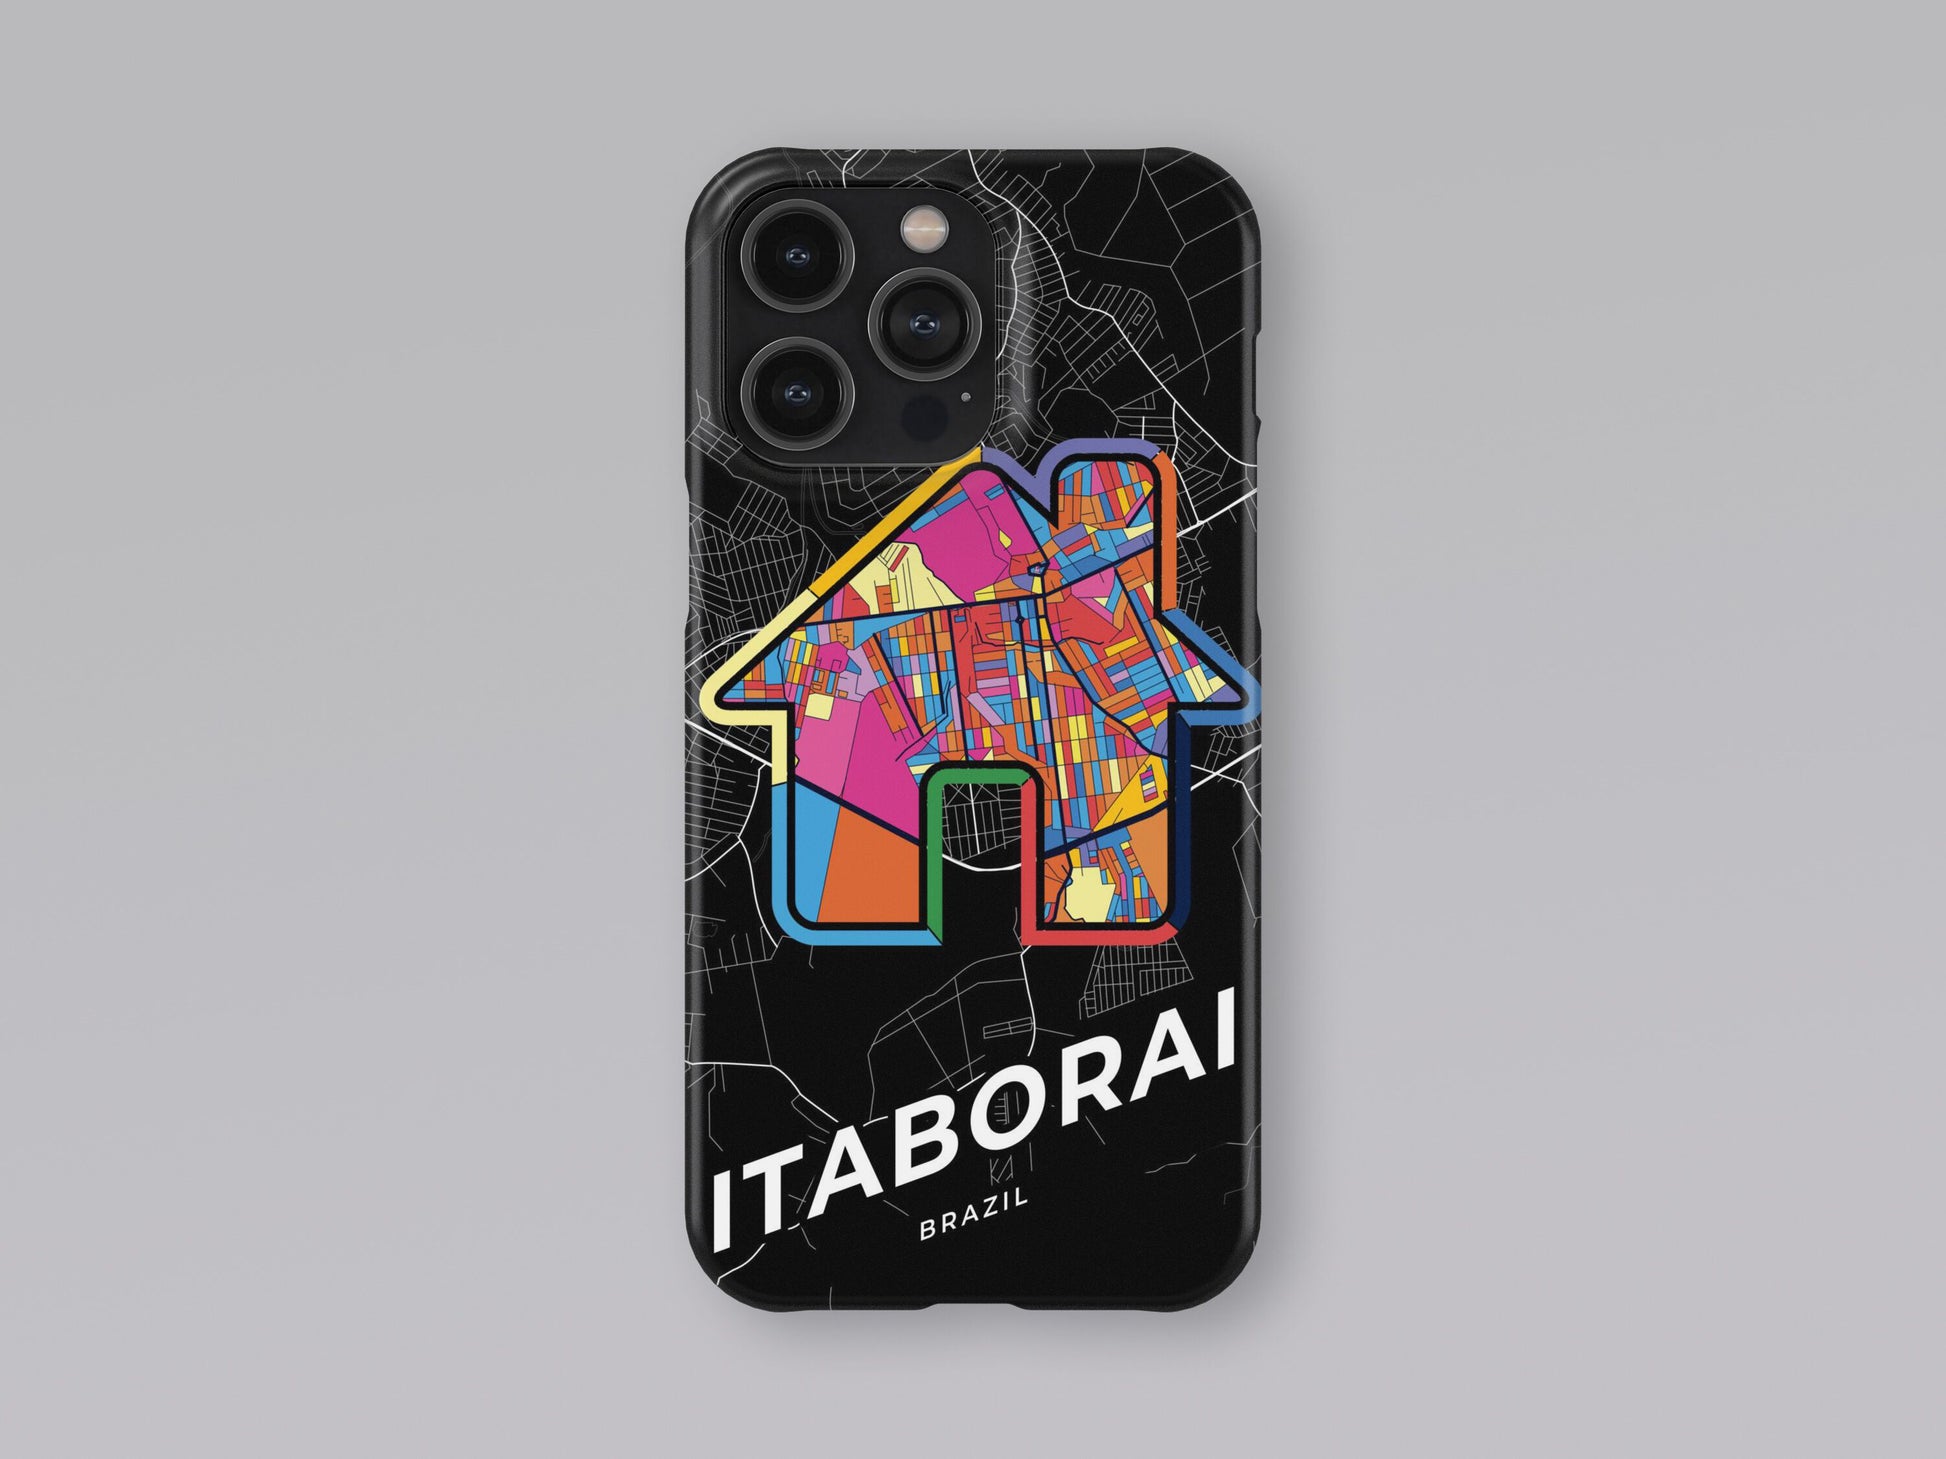 Itaborai Brazil slim phone case with colorful icon. Birthday, wedding or housewarming gift. Couple match cases. 3